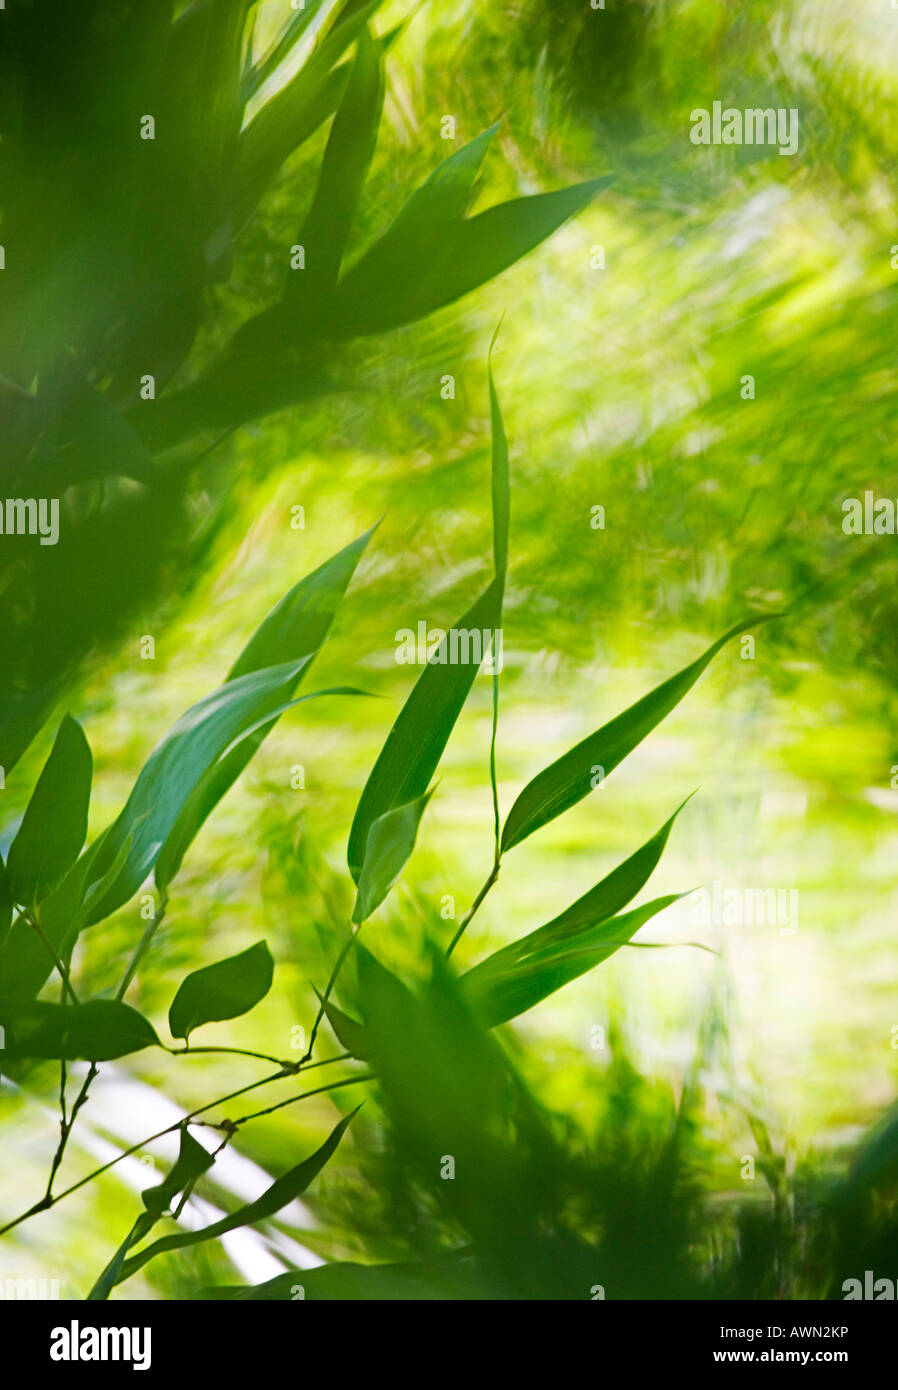 Leaves of bamboo in a bamboo forest Stock Photo